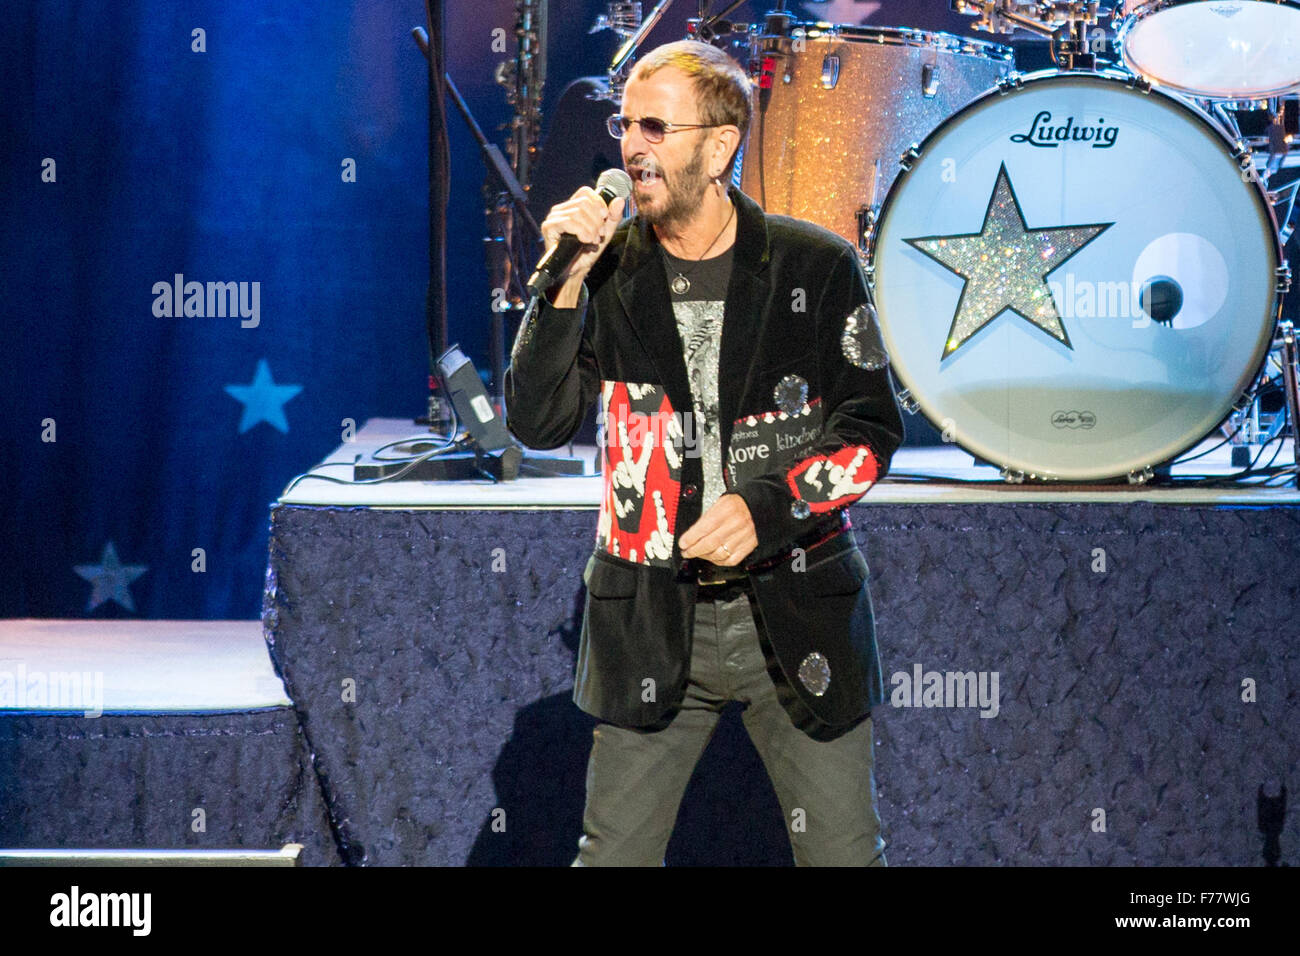 Milwaukee, Wisconsin, USA. 17th Oct, 2015. Musician RINGO STARR performs live with his All-Starr Band at the Riverside Theater in Milwaukee, Wisconsin © Daniel DeSlover/ZUMA Wire/Alamy Live News Stock Photo